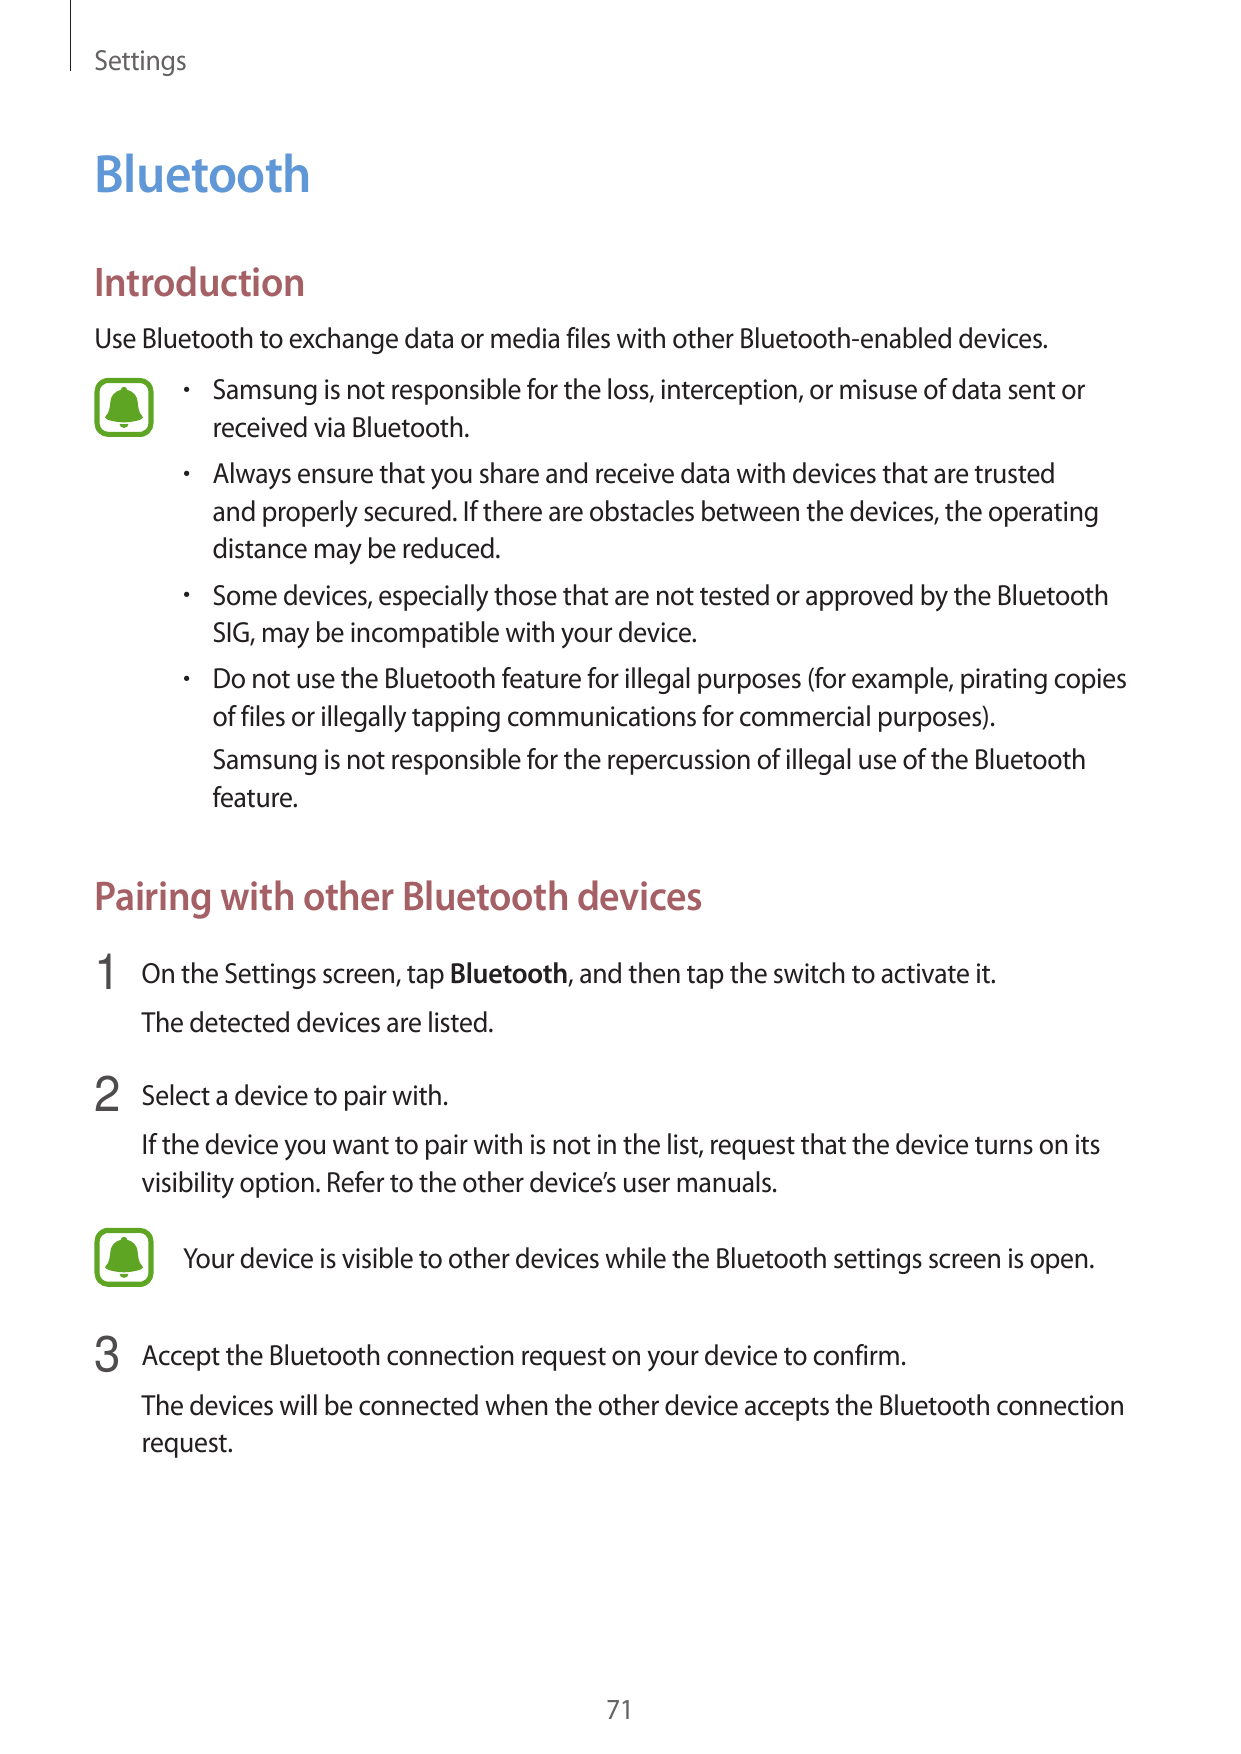 SettingsBluetoothIntroductionUse Bluetooth to exchange data or media files with other Bluetooth-enabled devices.• Samsung is not